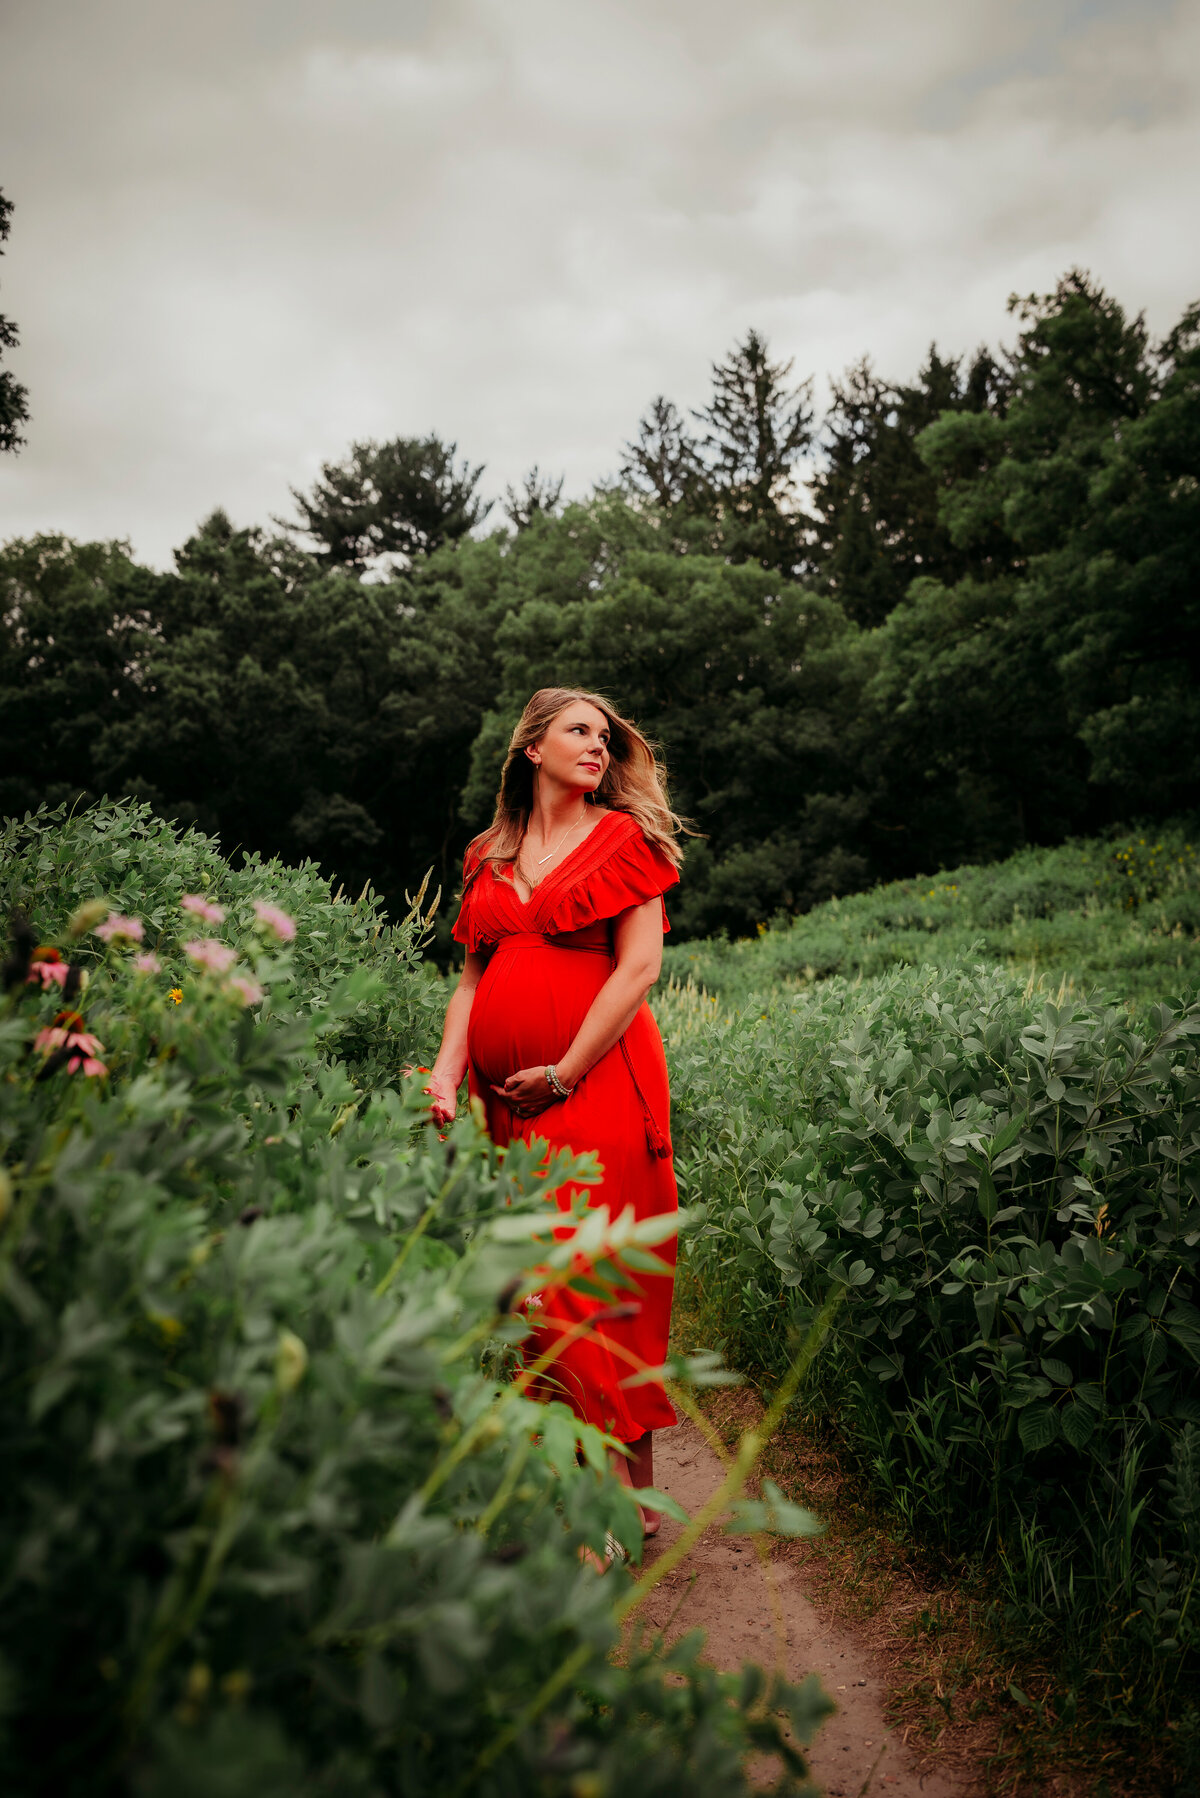 Amidst the serene beauty of the butterfly garden in Minneapolis, a stunning maternity portrait comes to life. The beautiful woman, adorned in a flowing red dress, gazes over her shoulder as her hair dances in the wind. She lovingly cradles her pregnant belly, capturing a moment of both grace and anticipation in the heart of the garden.